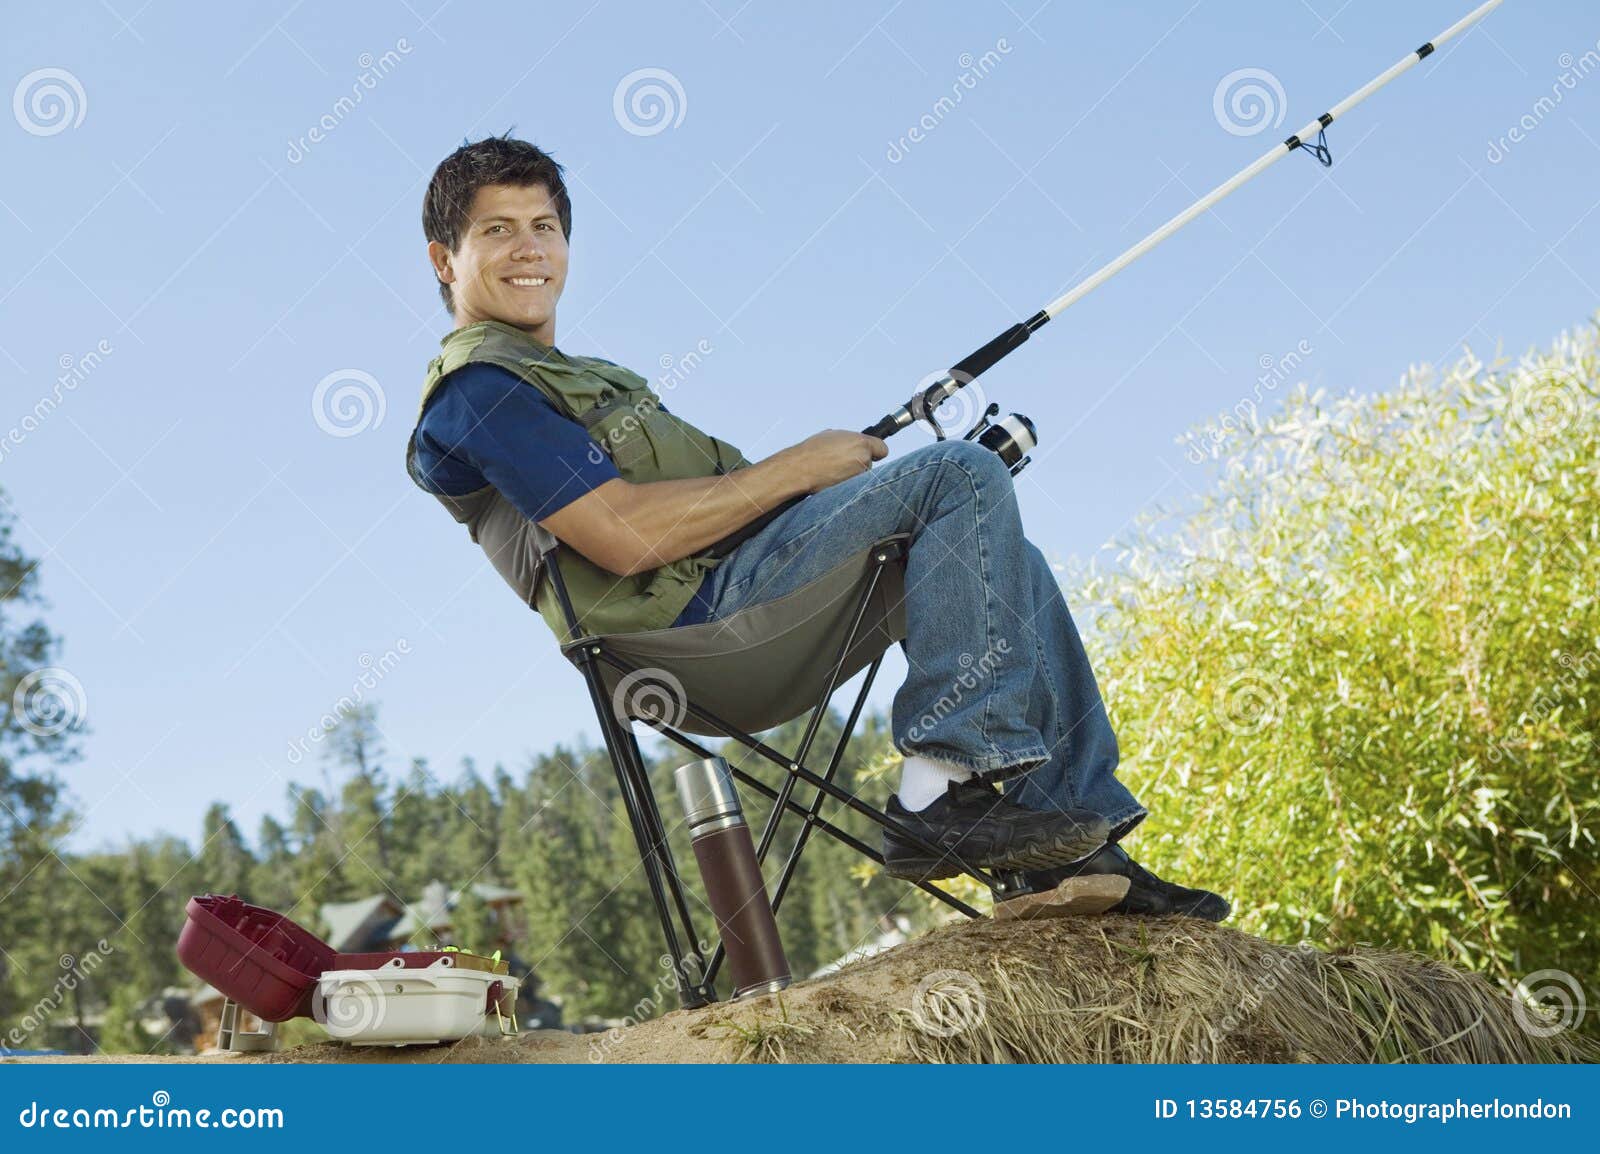 https://thumbs.dreamstime.com/z/man-fly-fishing-sitting-collapsible-chair-13584756.jpg